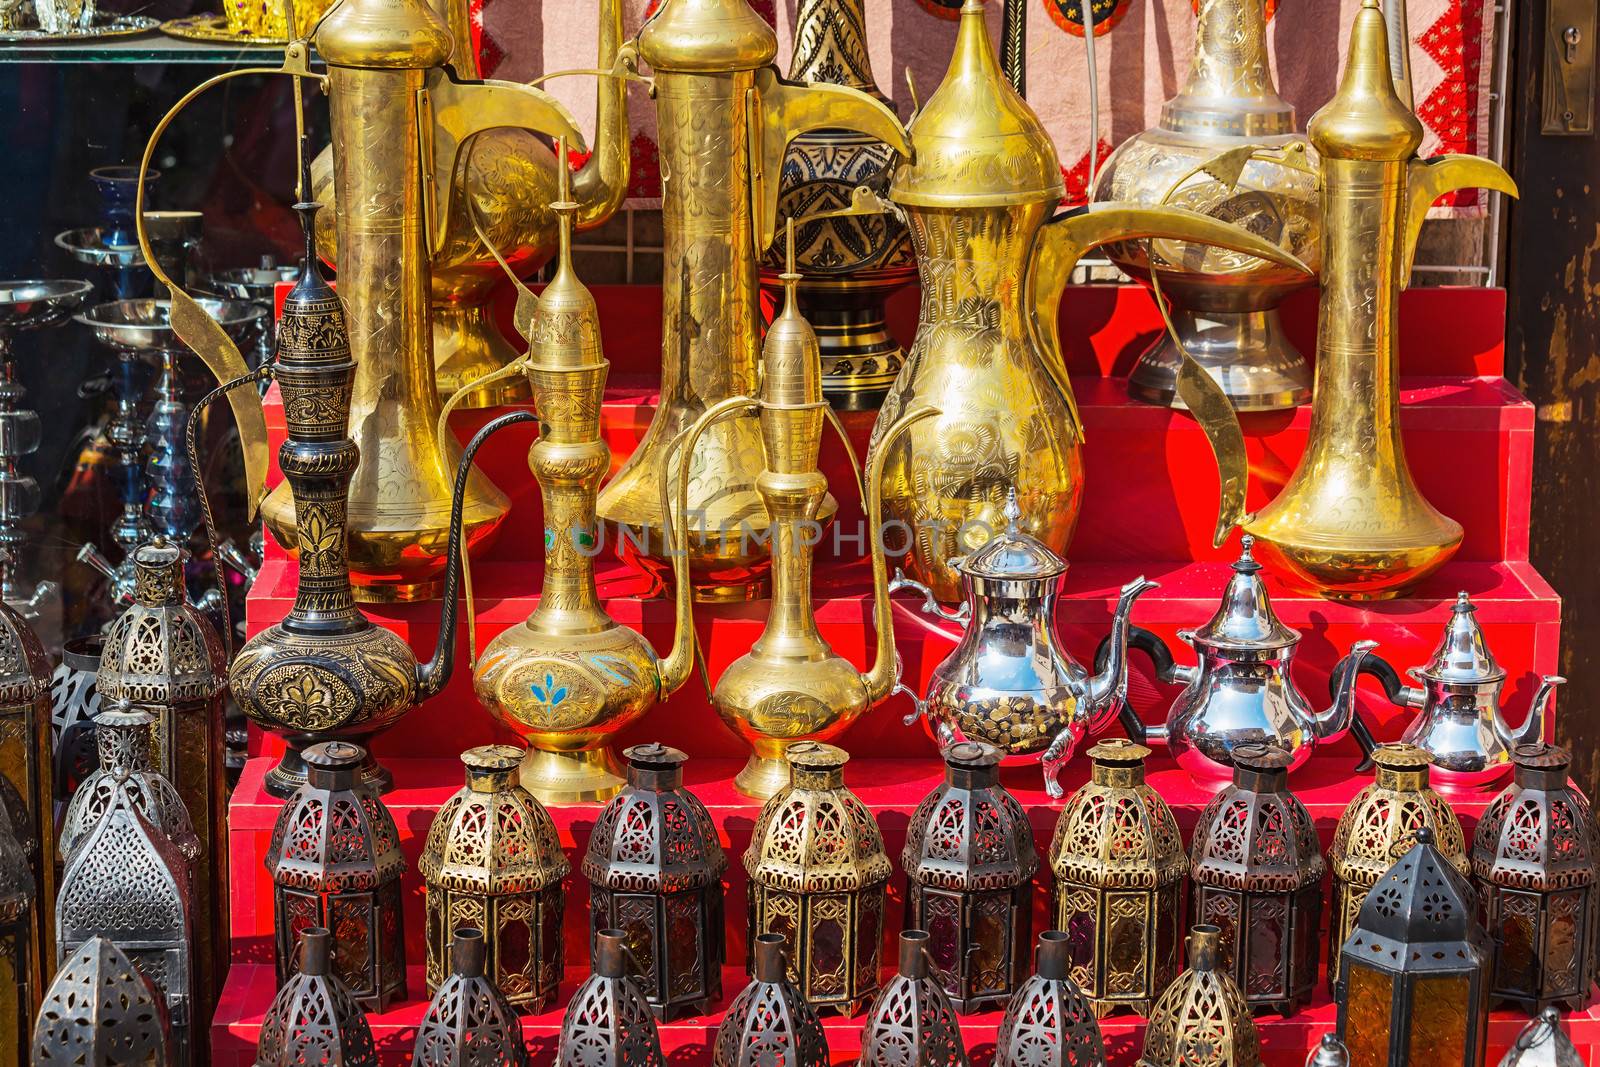 traditional coffee pots and lamps at the souq in Dubai. by oleg_zhukov